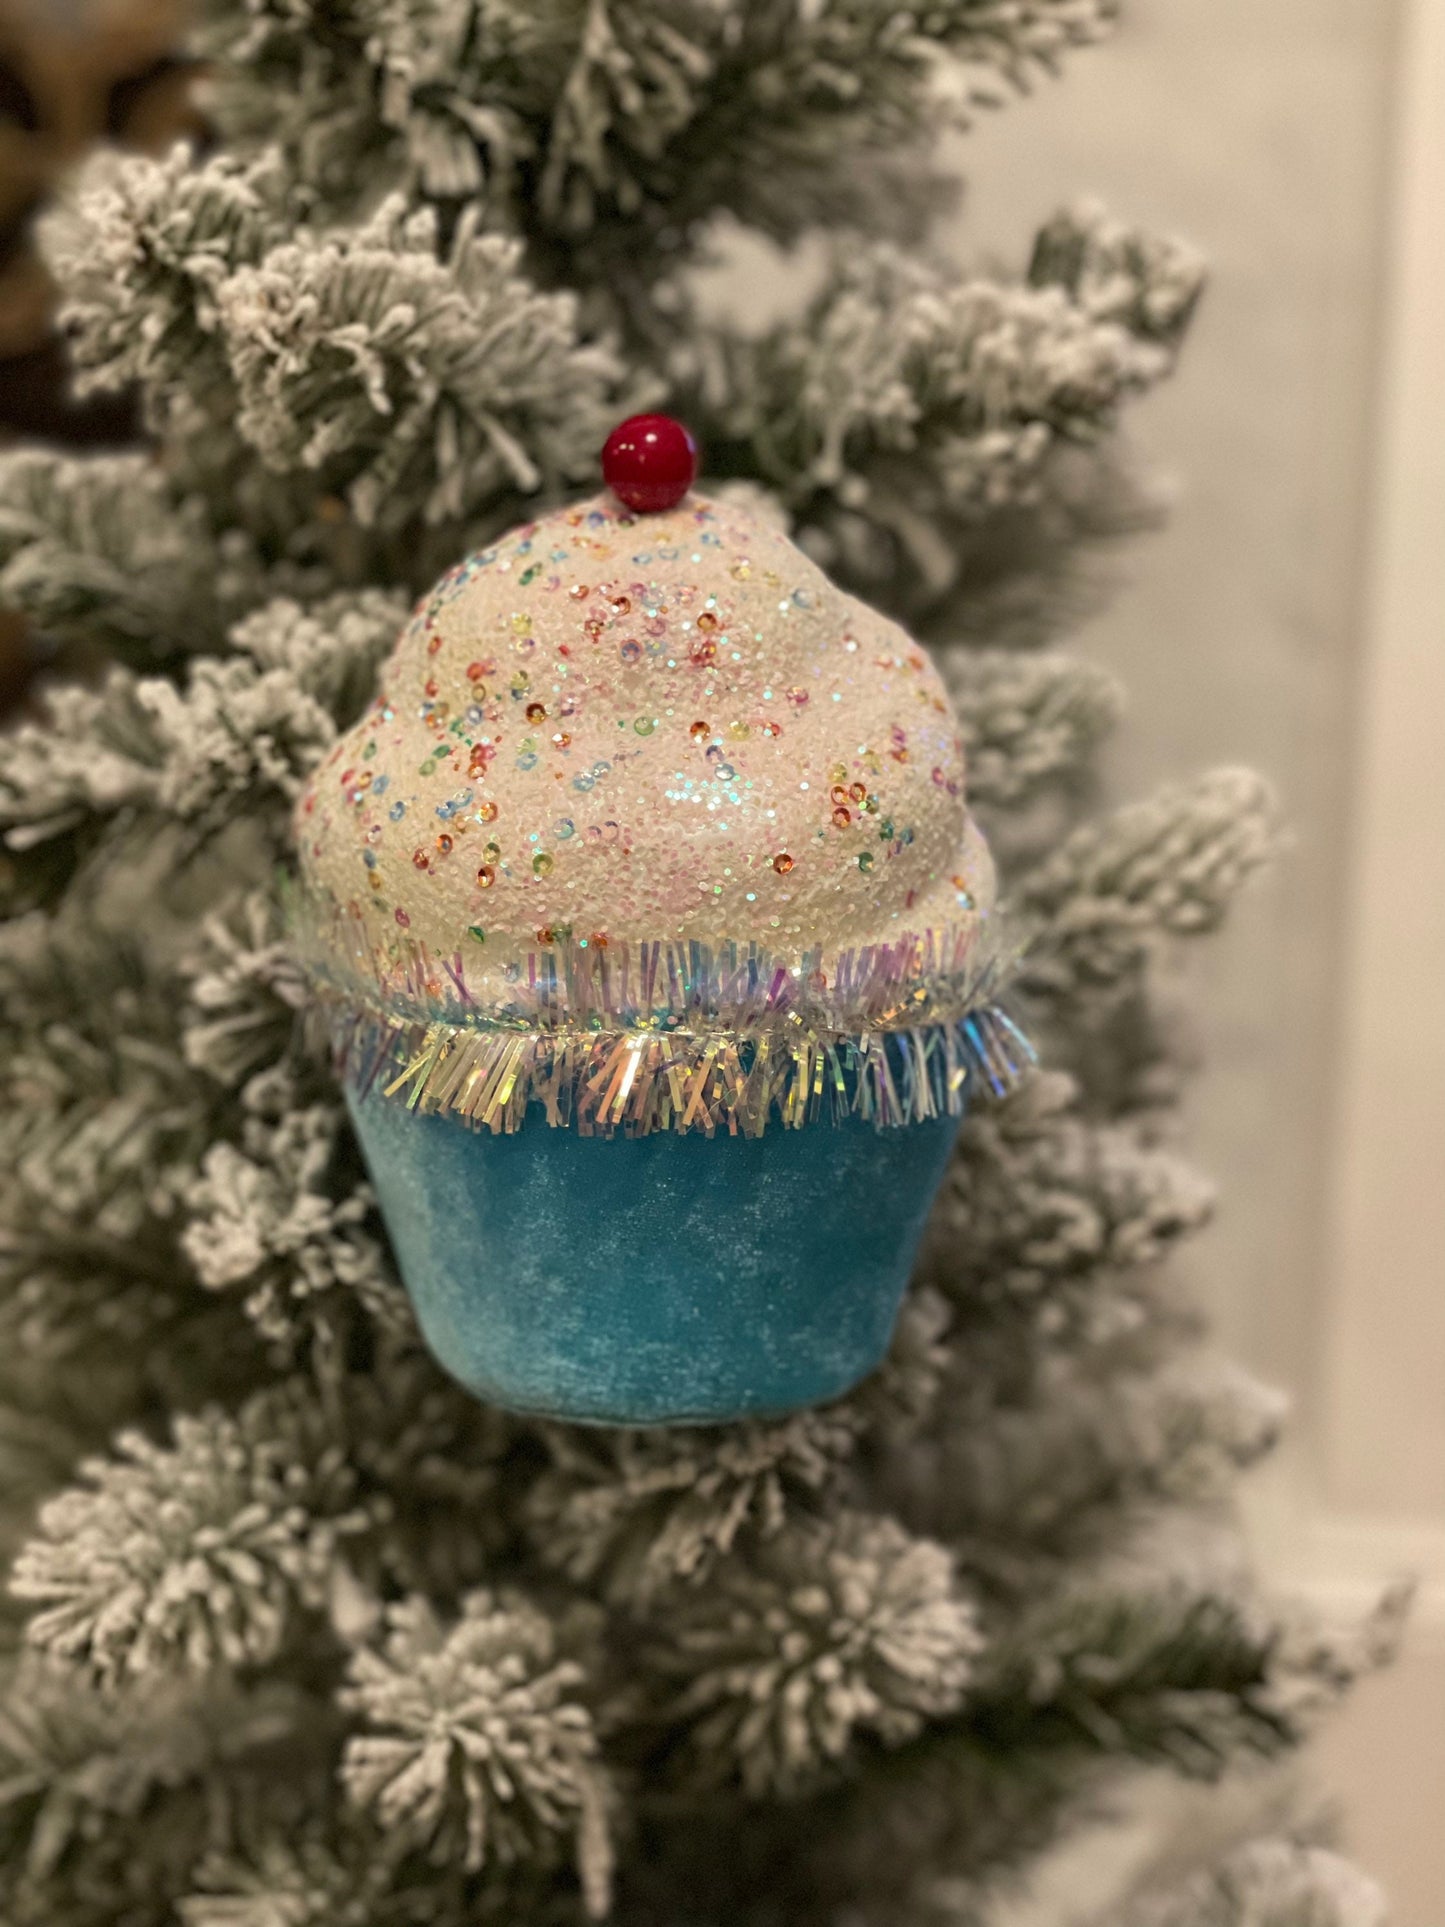 7” Blue Cupcake with sprinkles ornament. One Blue cupcake only.*